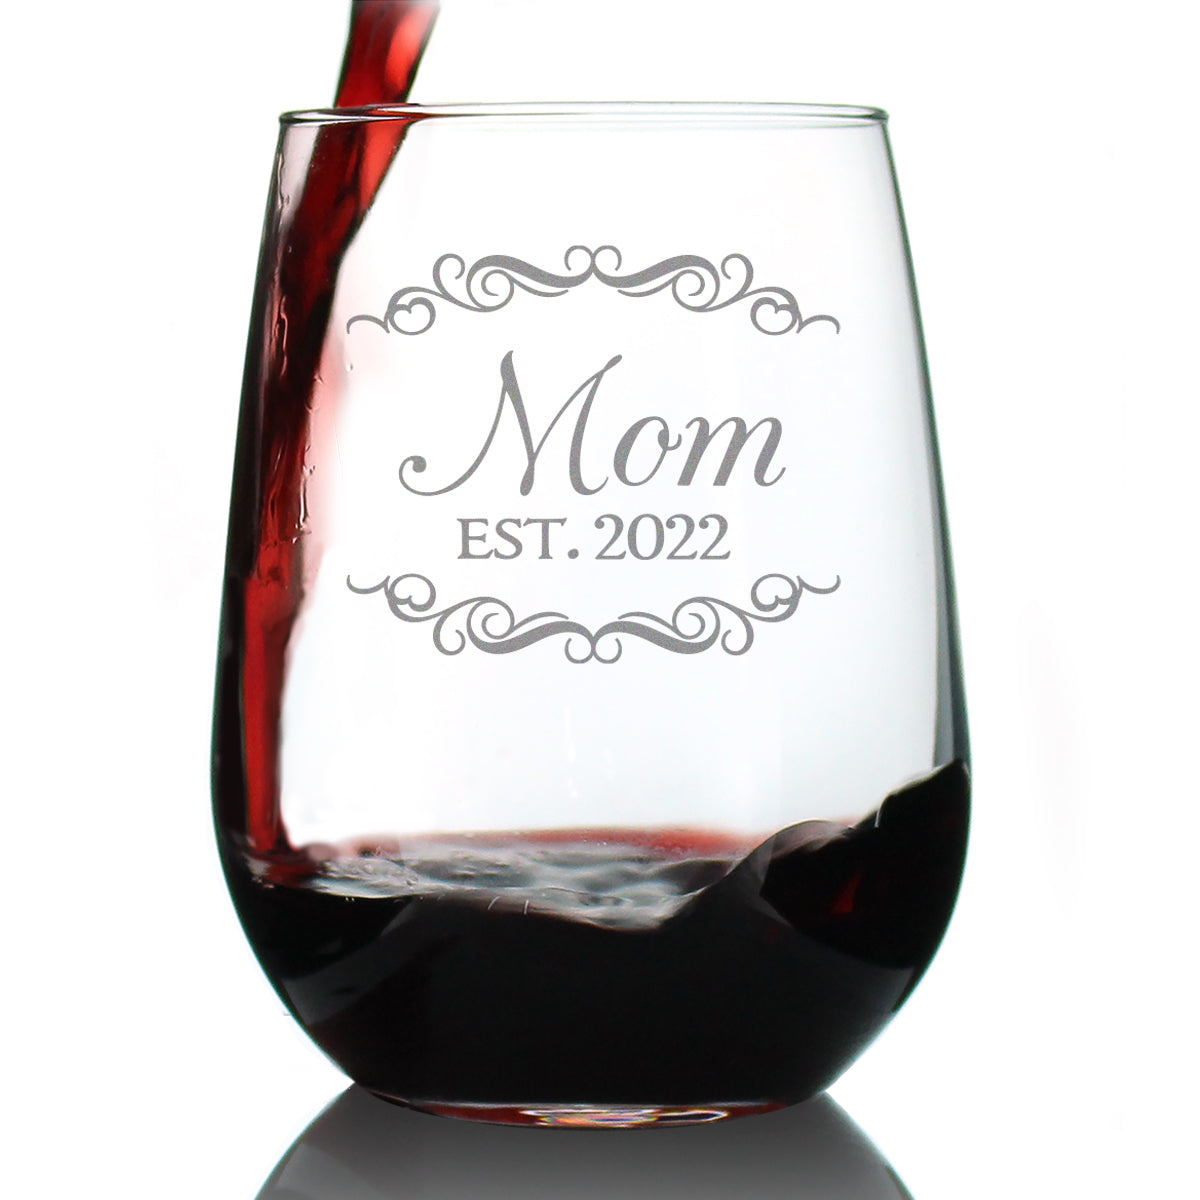 Mom Est 2022 - New Mother Stemless Wine Glass Gift for First Time Parents - Decorative 17 Oz Large Glasses